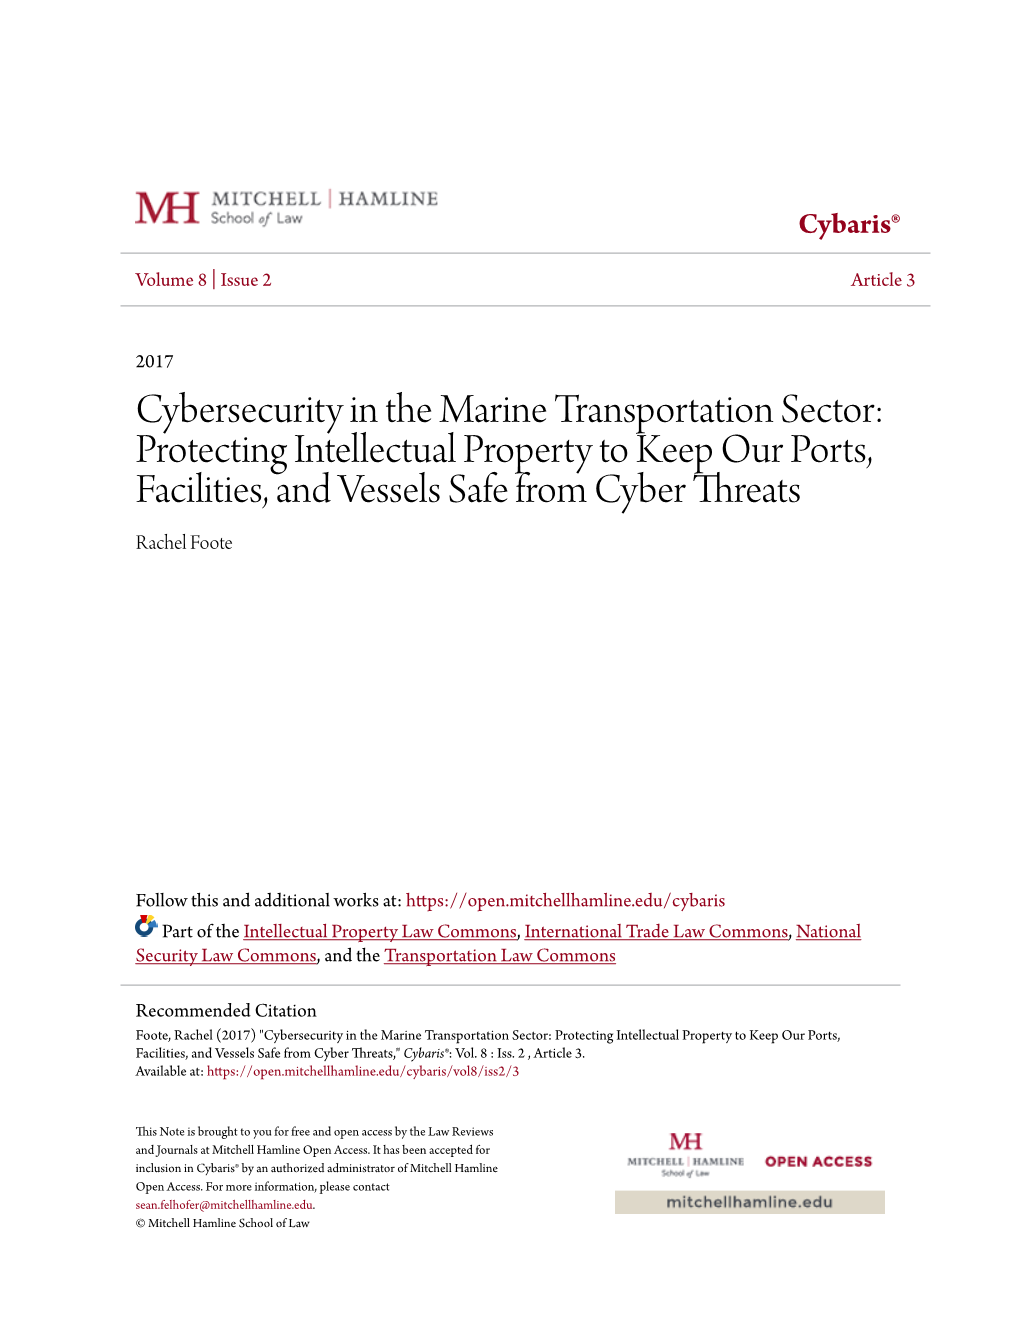 Cybersecurity in the Marine Transportation Sector: Protecting Intellectual Property to Keep Our Ports, Facilities, and Vessels Safe from Cyber Threats Rachel Foote